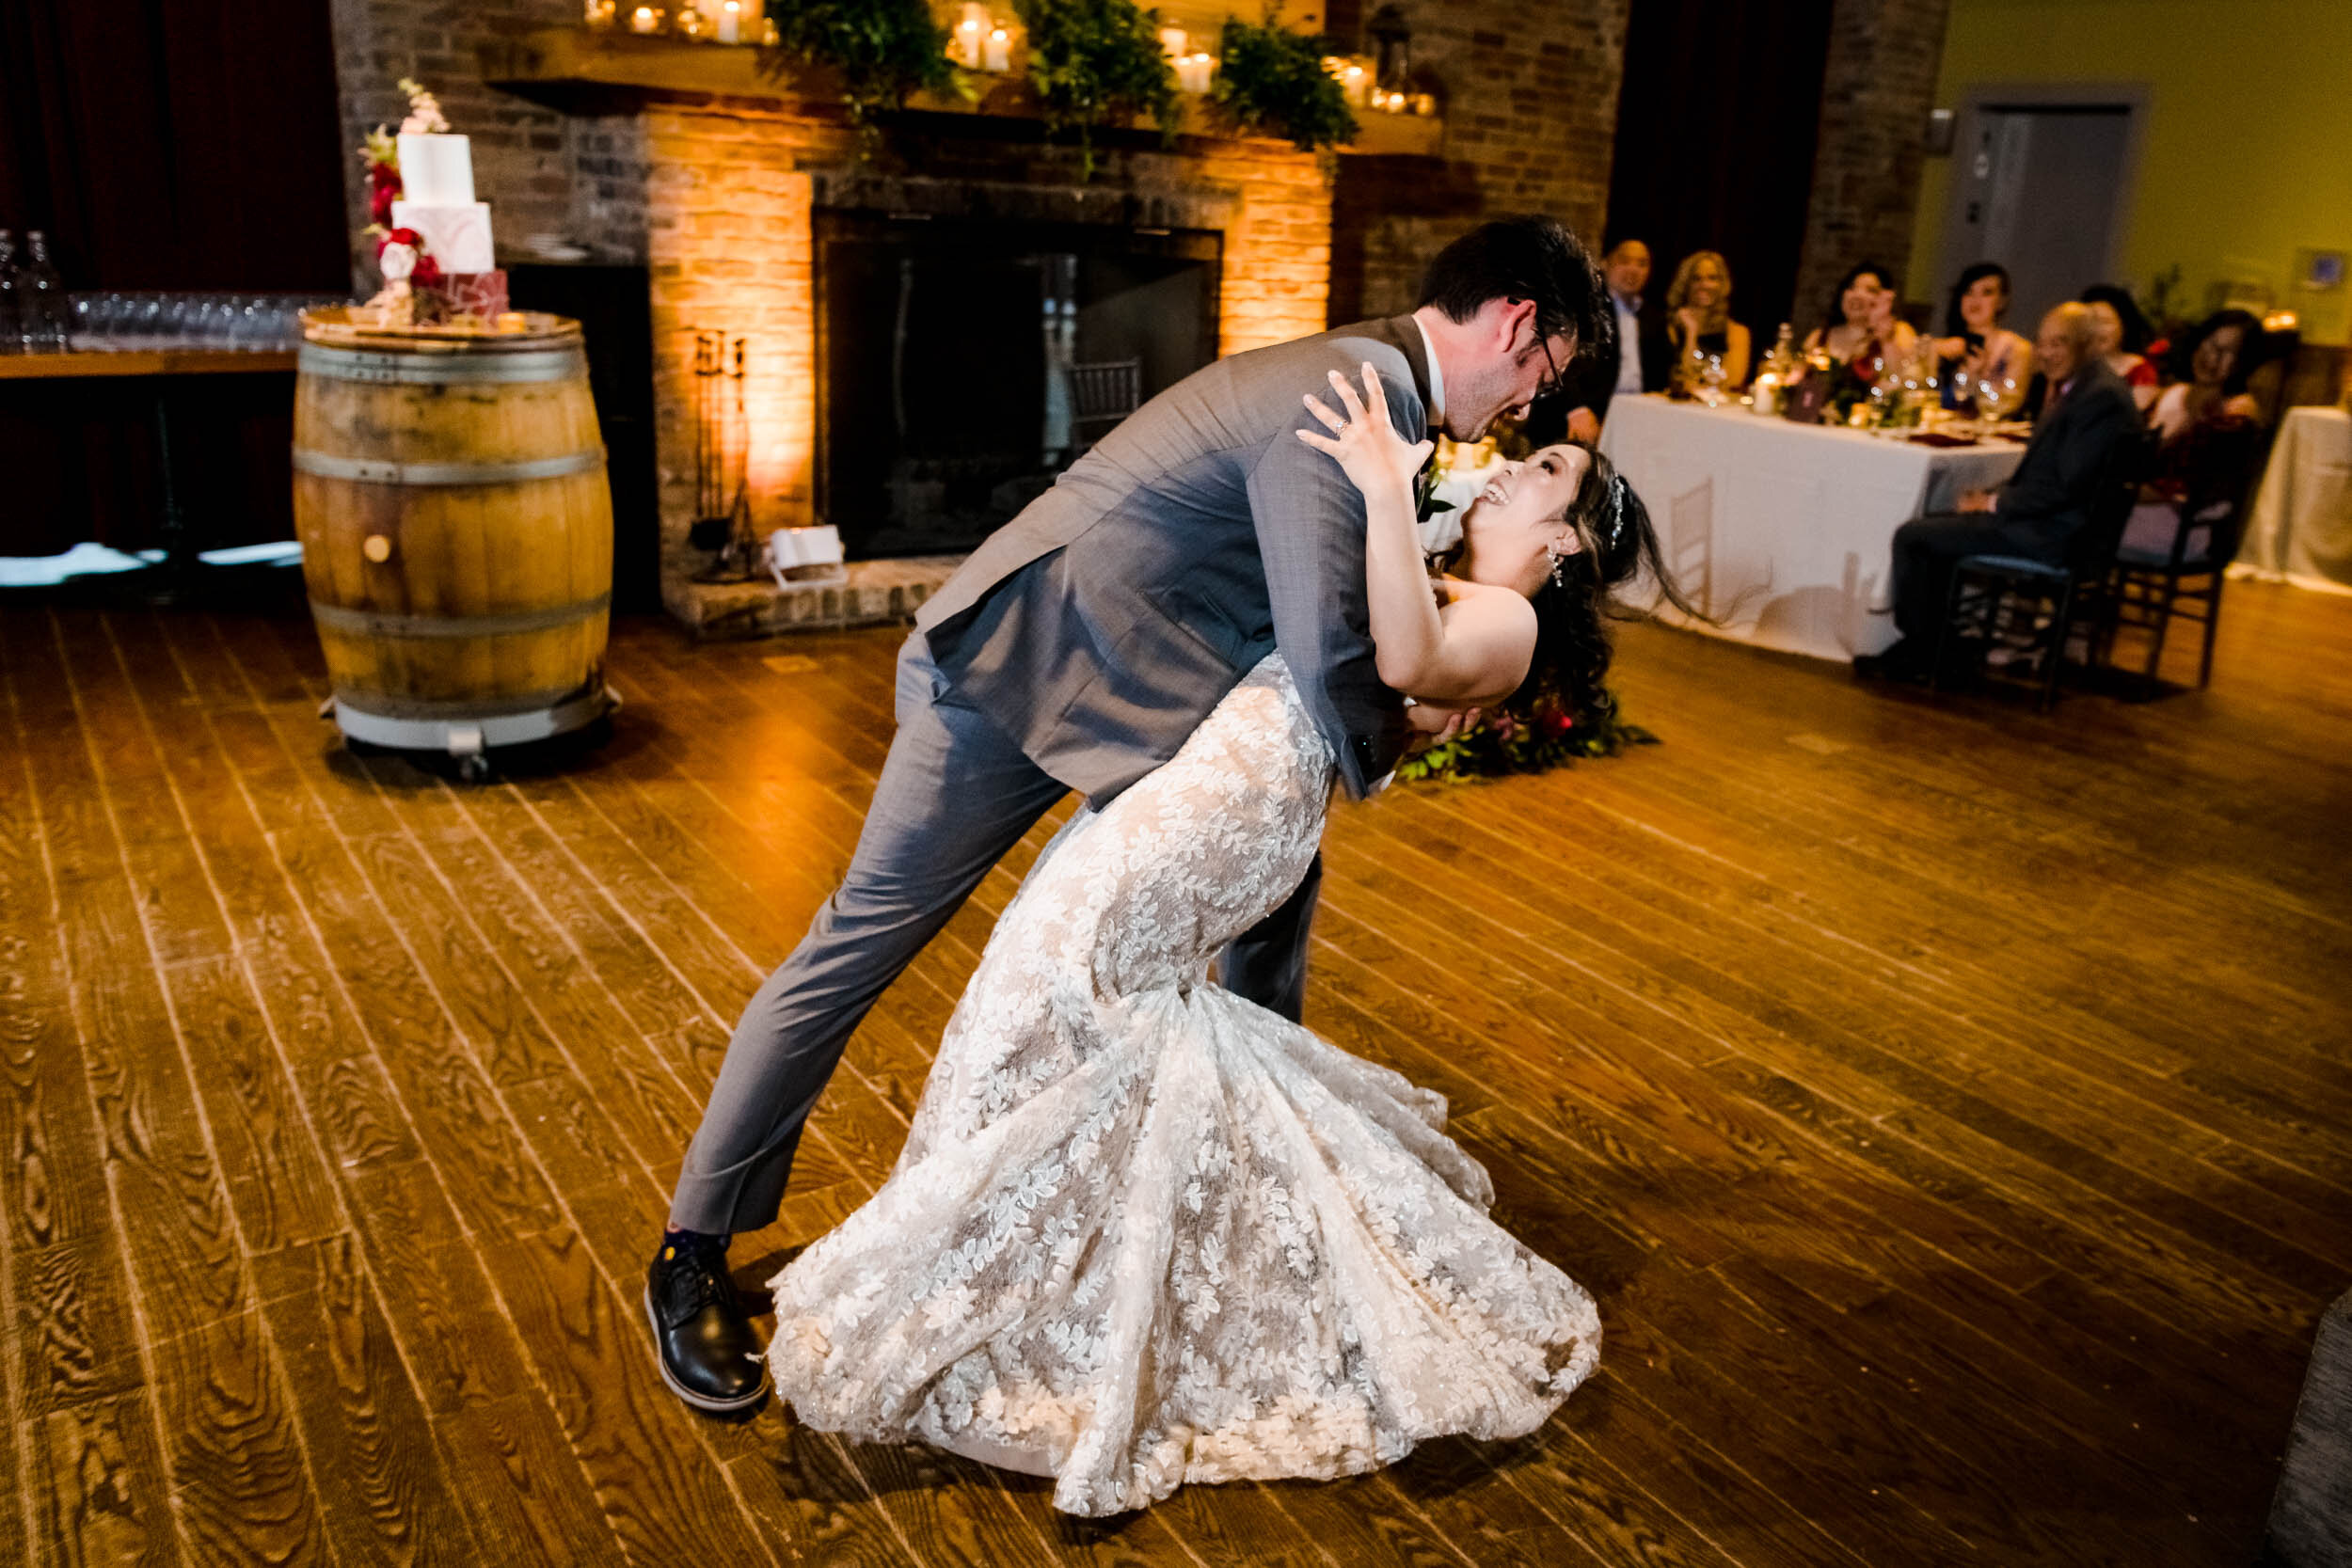 Chicago Wedding Photographer | City Winery | J. Brown Photography | groom dips the bride during first dance.